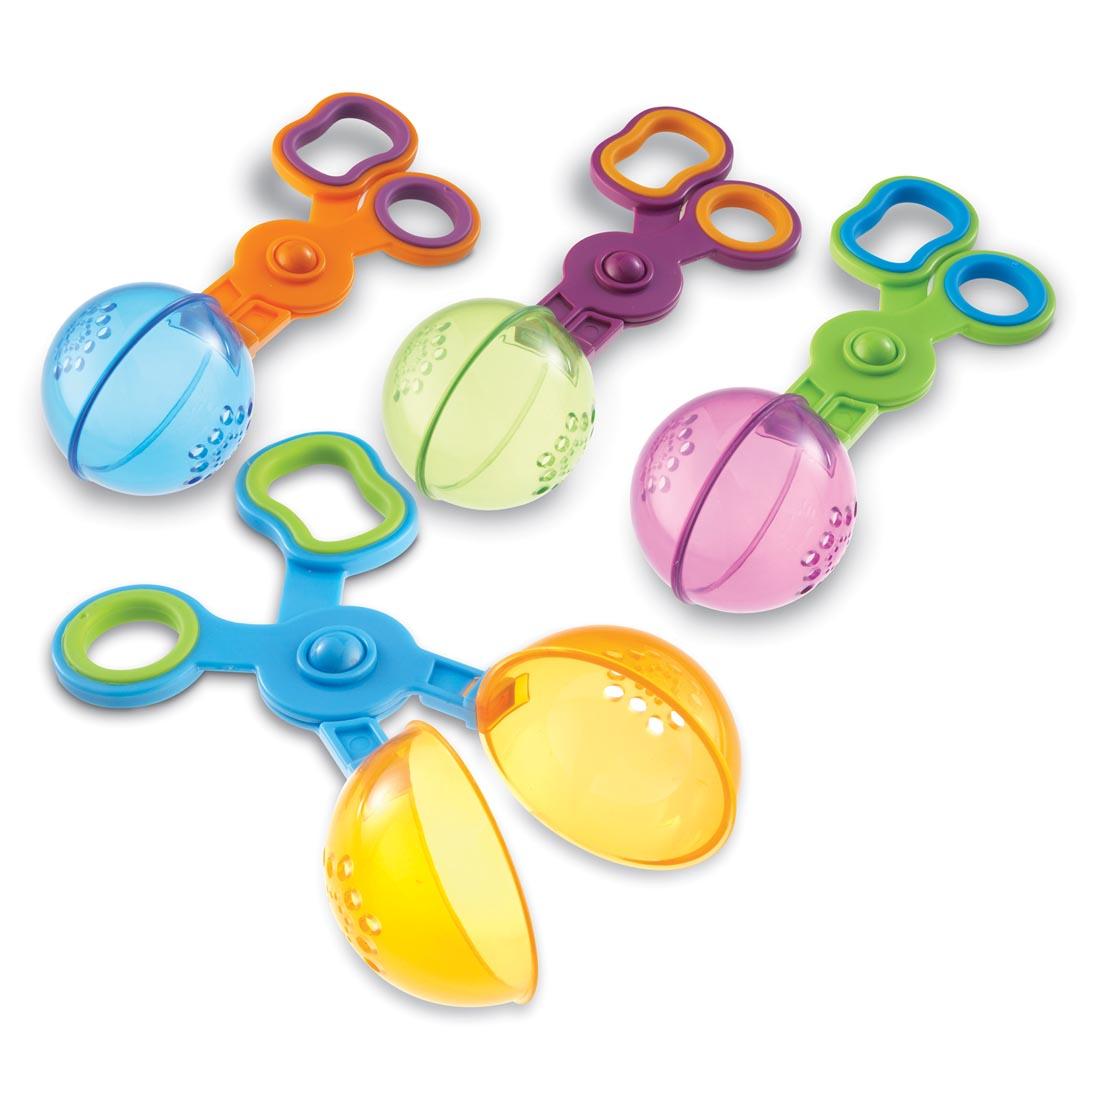 Four plastic ball scoopers with scissor-like handles